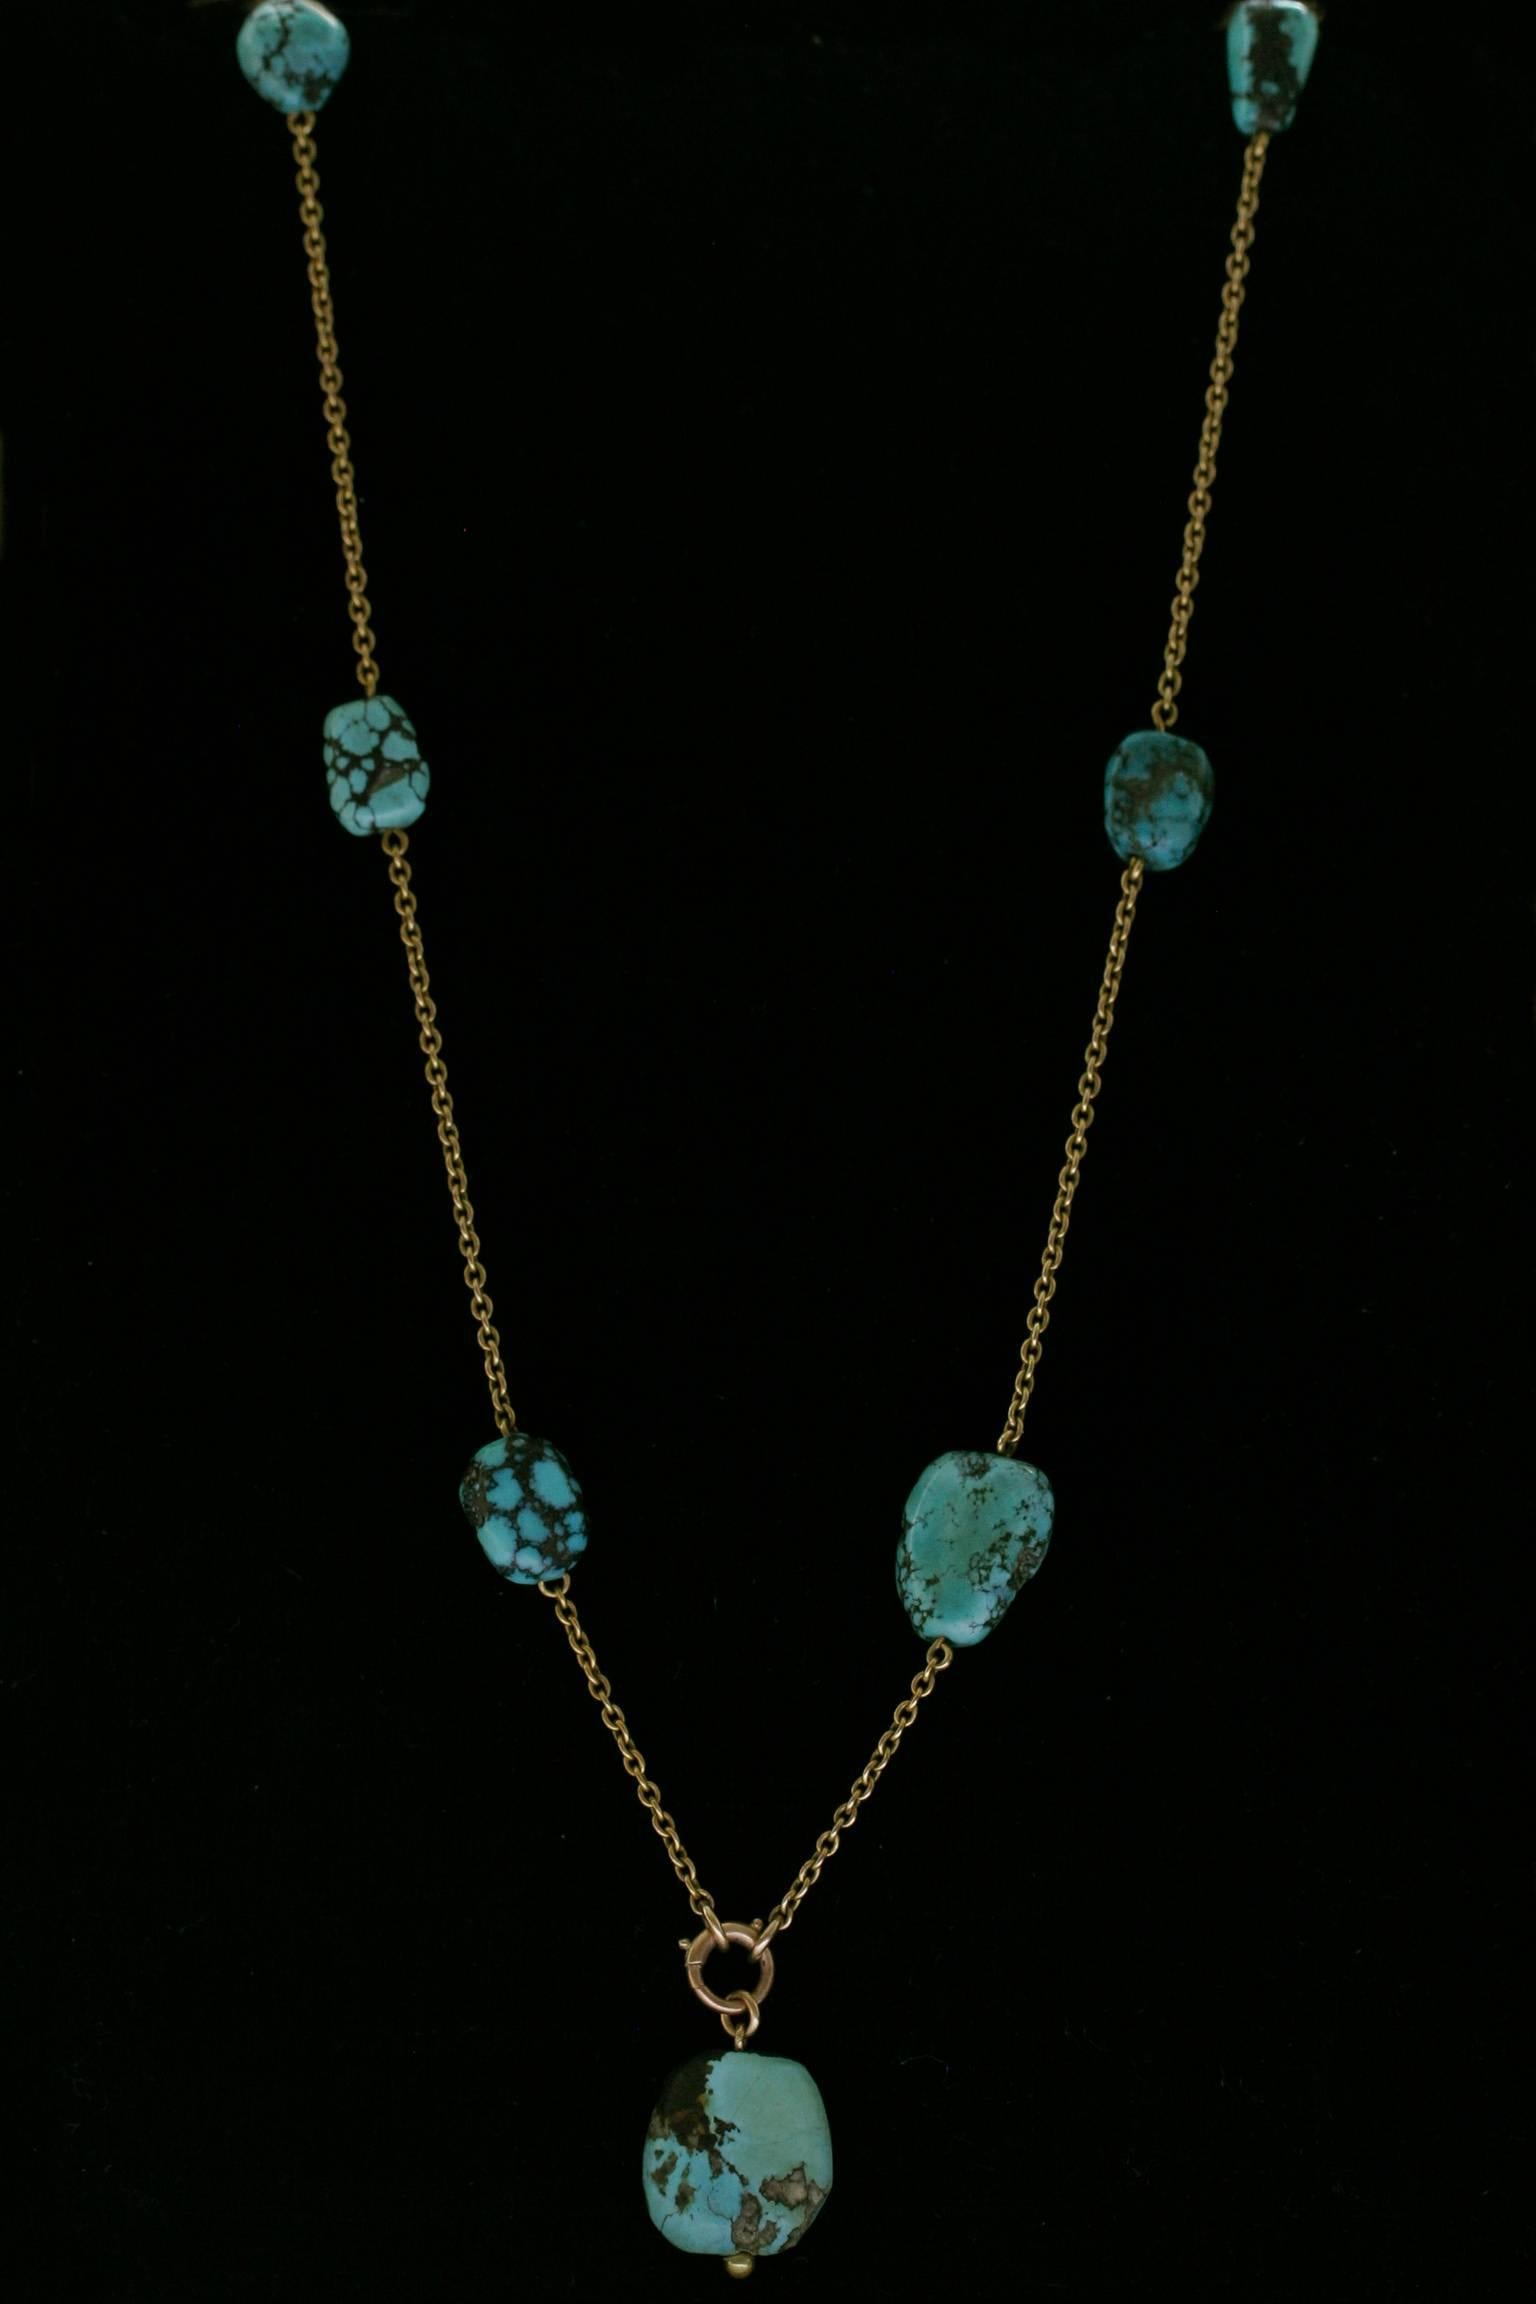 An Edwardian era 18k yellow gold and turquoise nugget necklace of fine quality. The bolt ring tests at 14k gold. The necklace also works beautifully without the large drop stone, which can be easily removed. It measures approximately 29 inches in